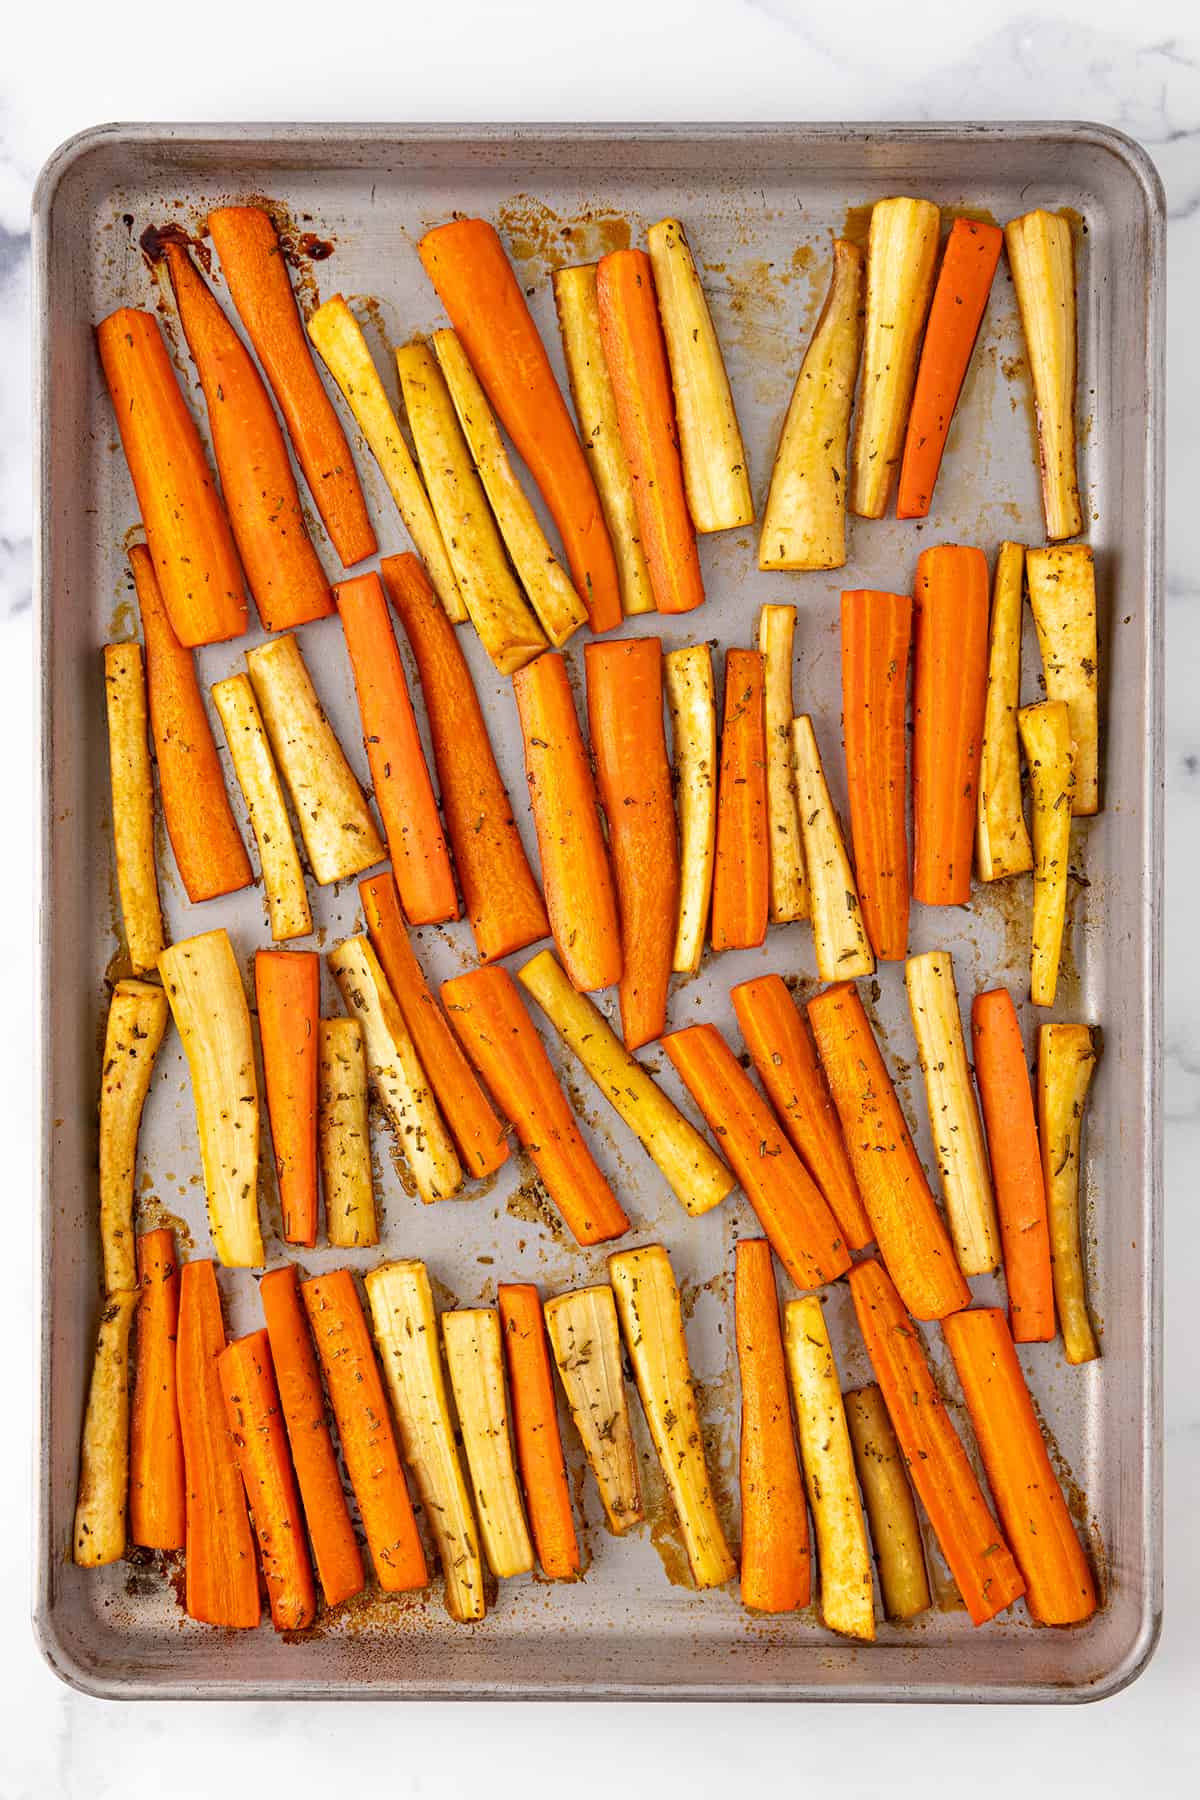 A large silver sheet pan with roasted parsnips and carrots.